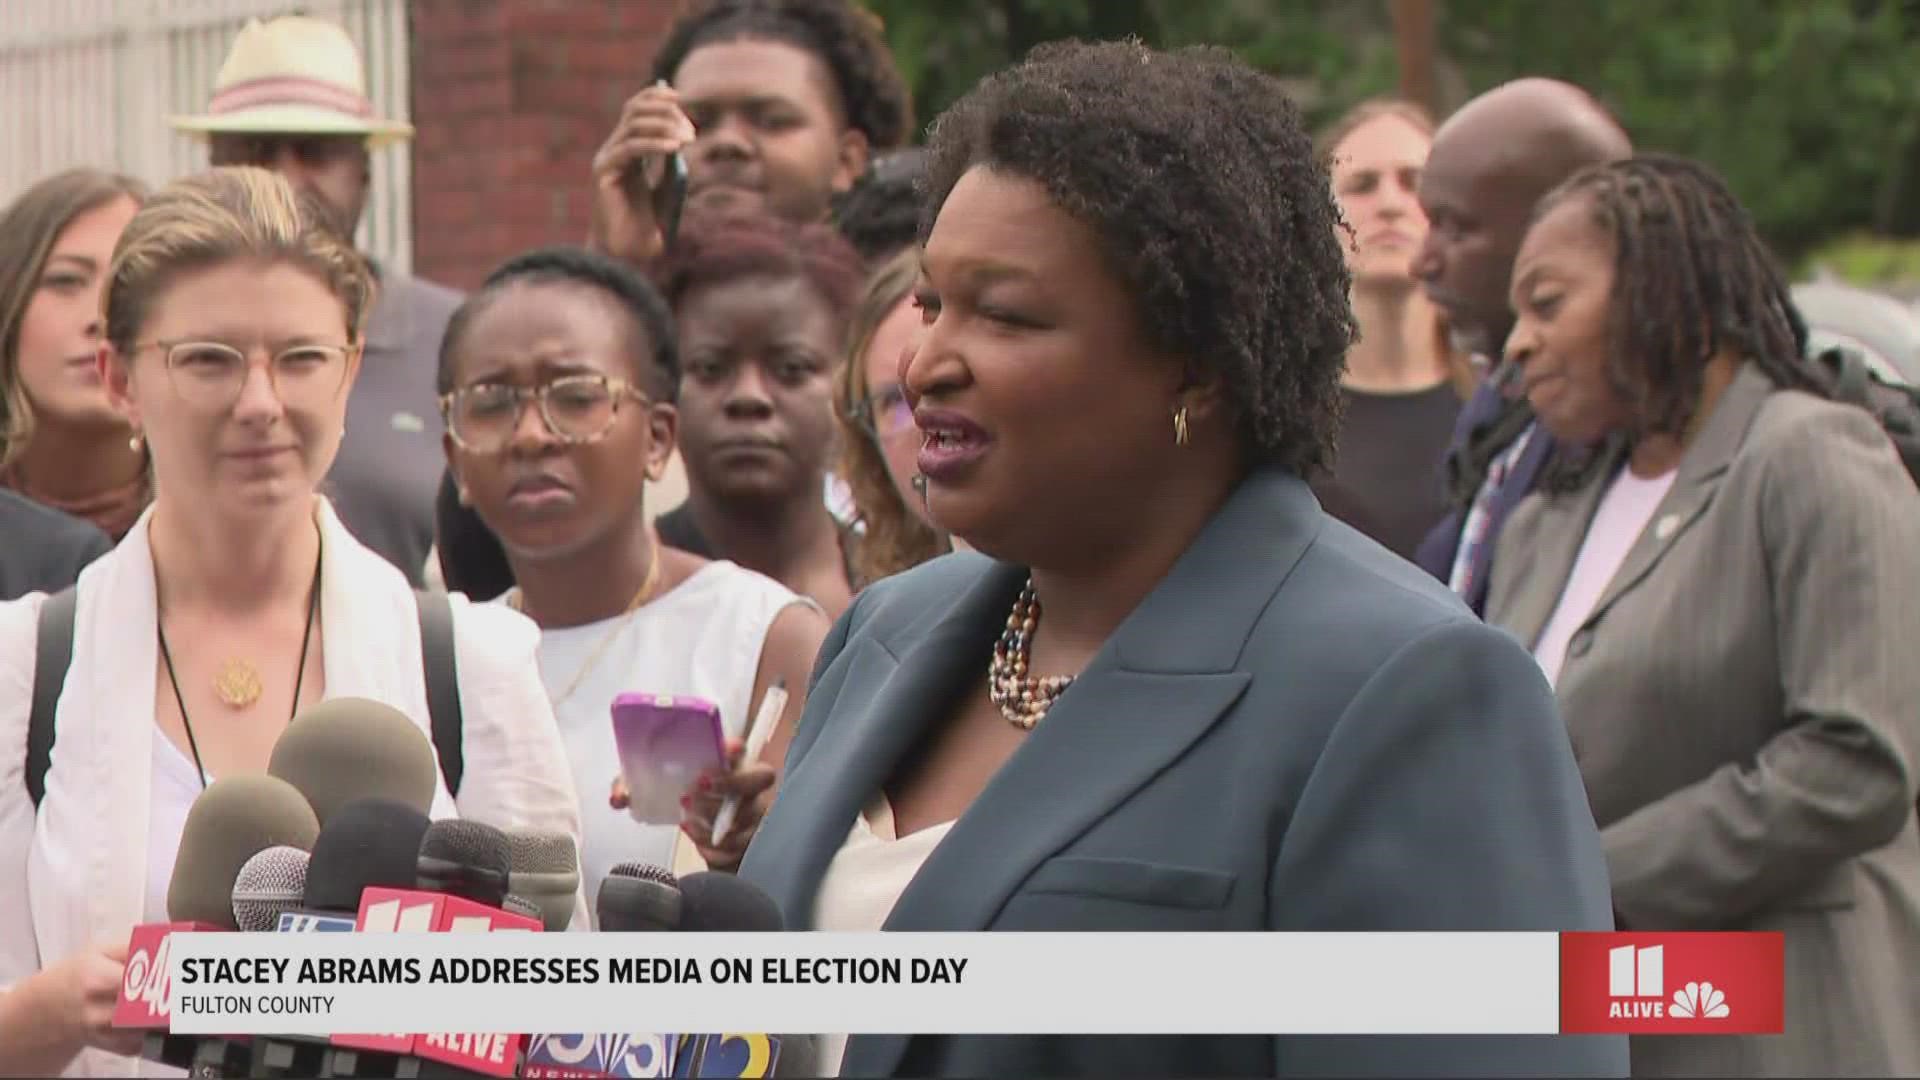 David Perdue said Stacey Abrams should "go back to where she came from" during a campaign event in Dunwoody, Georgia.